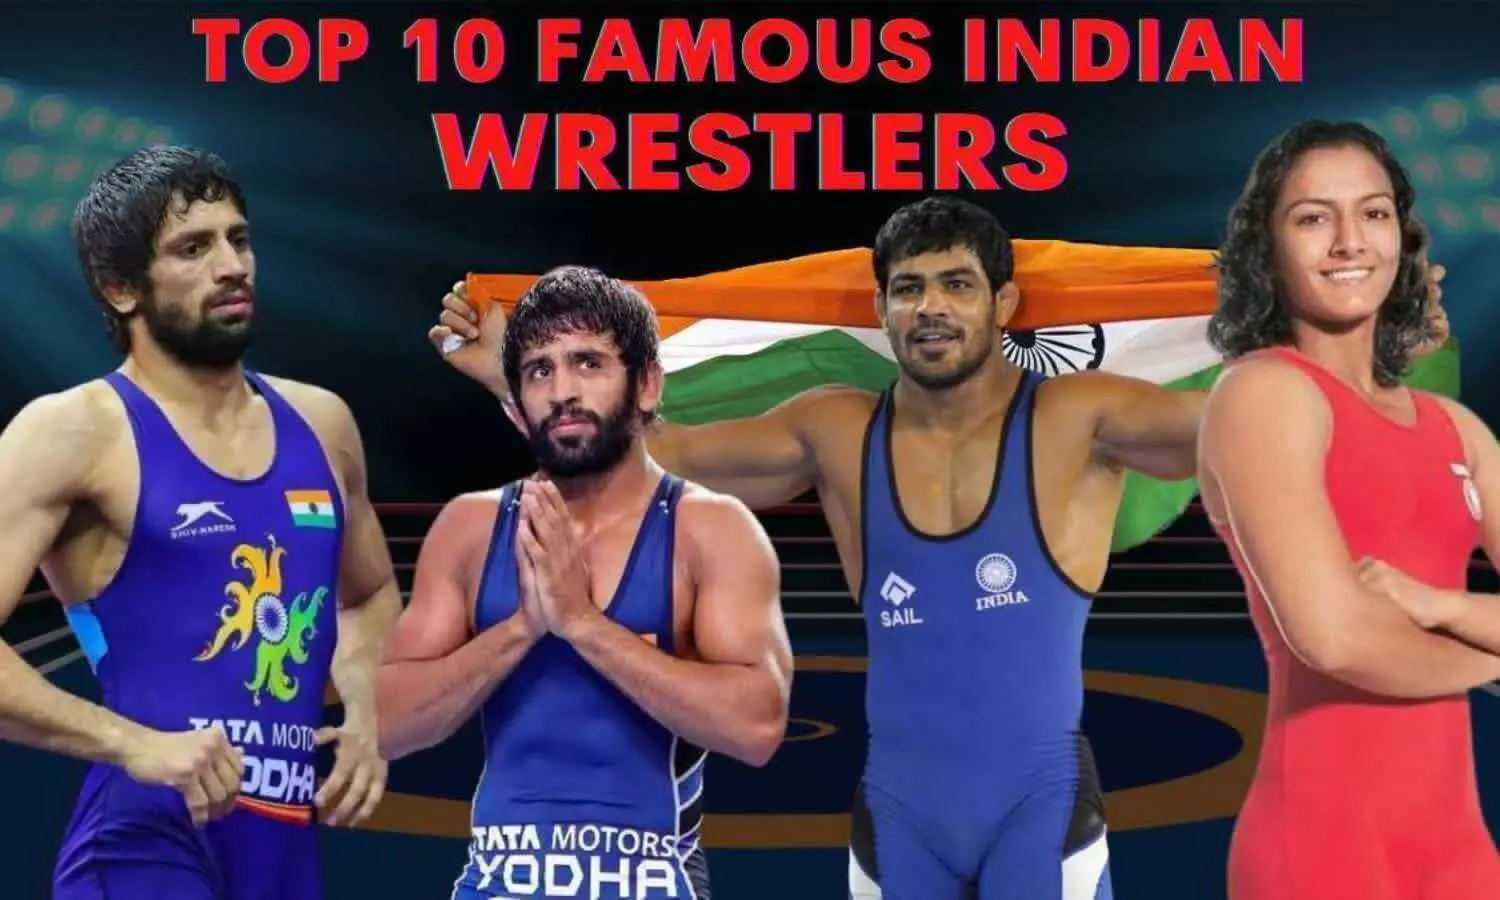 Top 10 Famous Indian Wrestlers